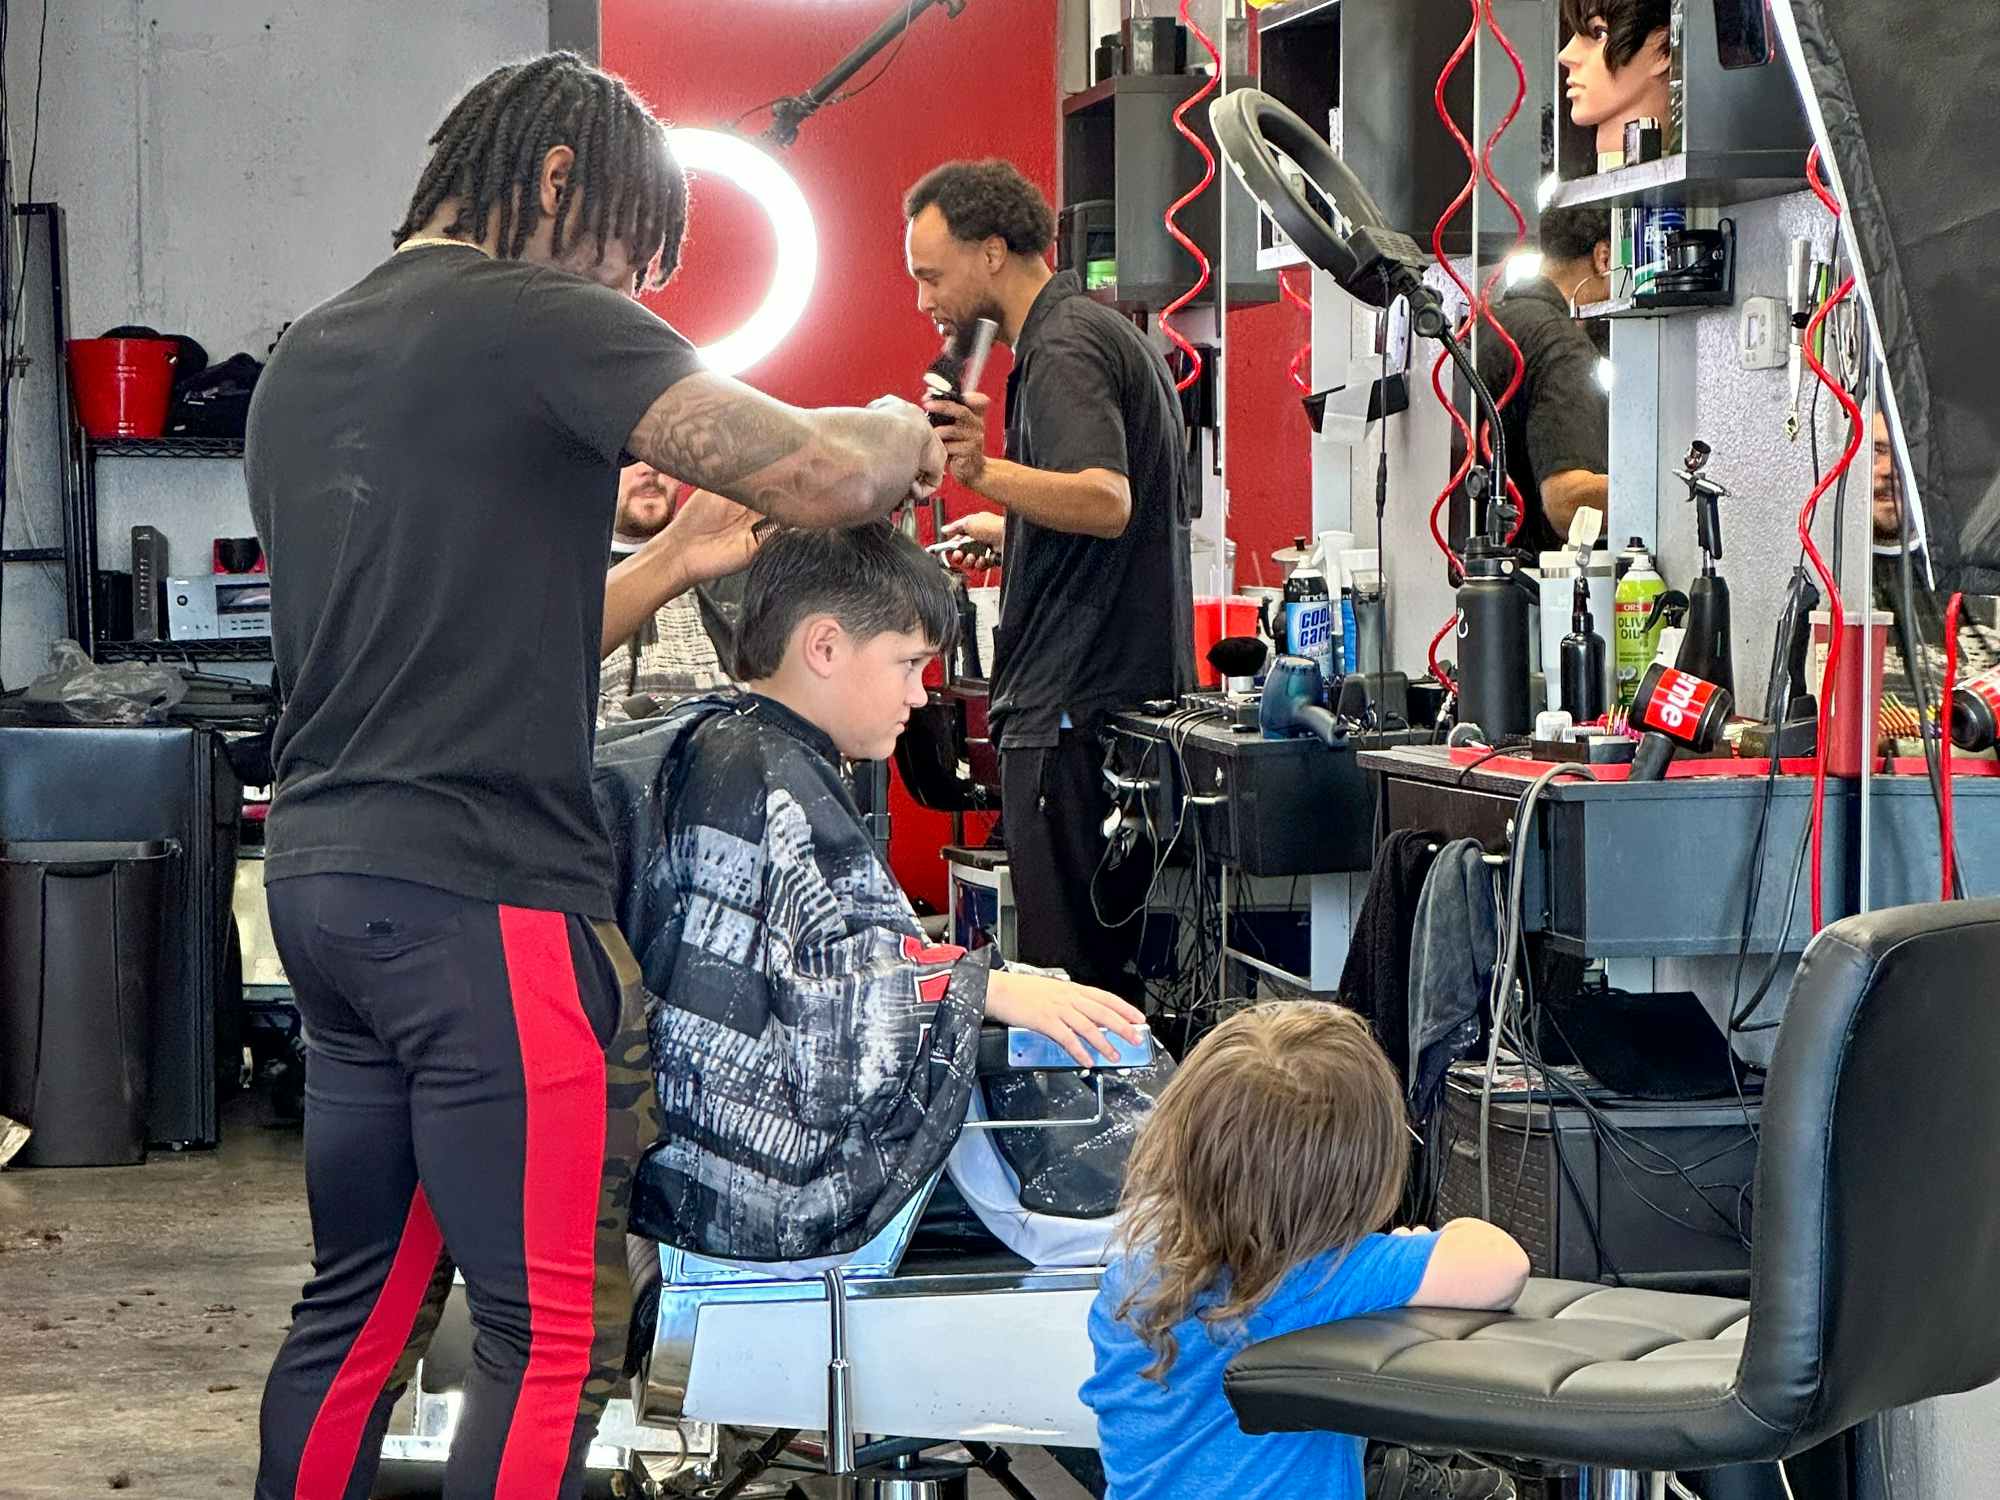 A young boy getting his hair cut at a barber shop